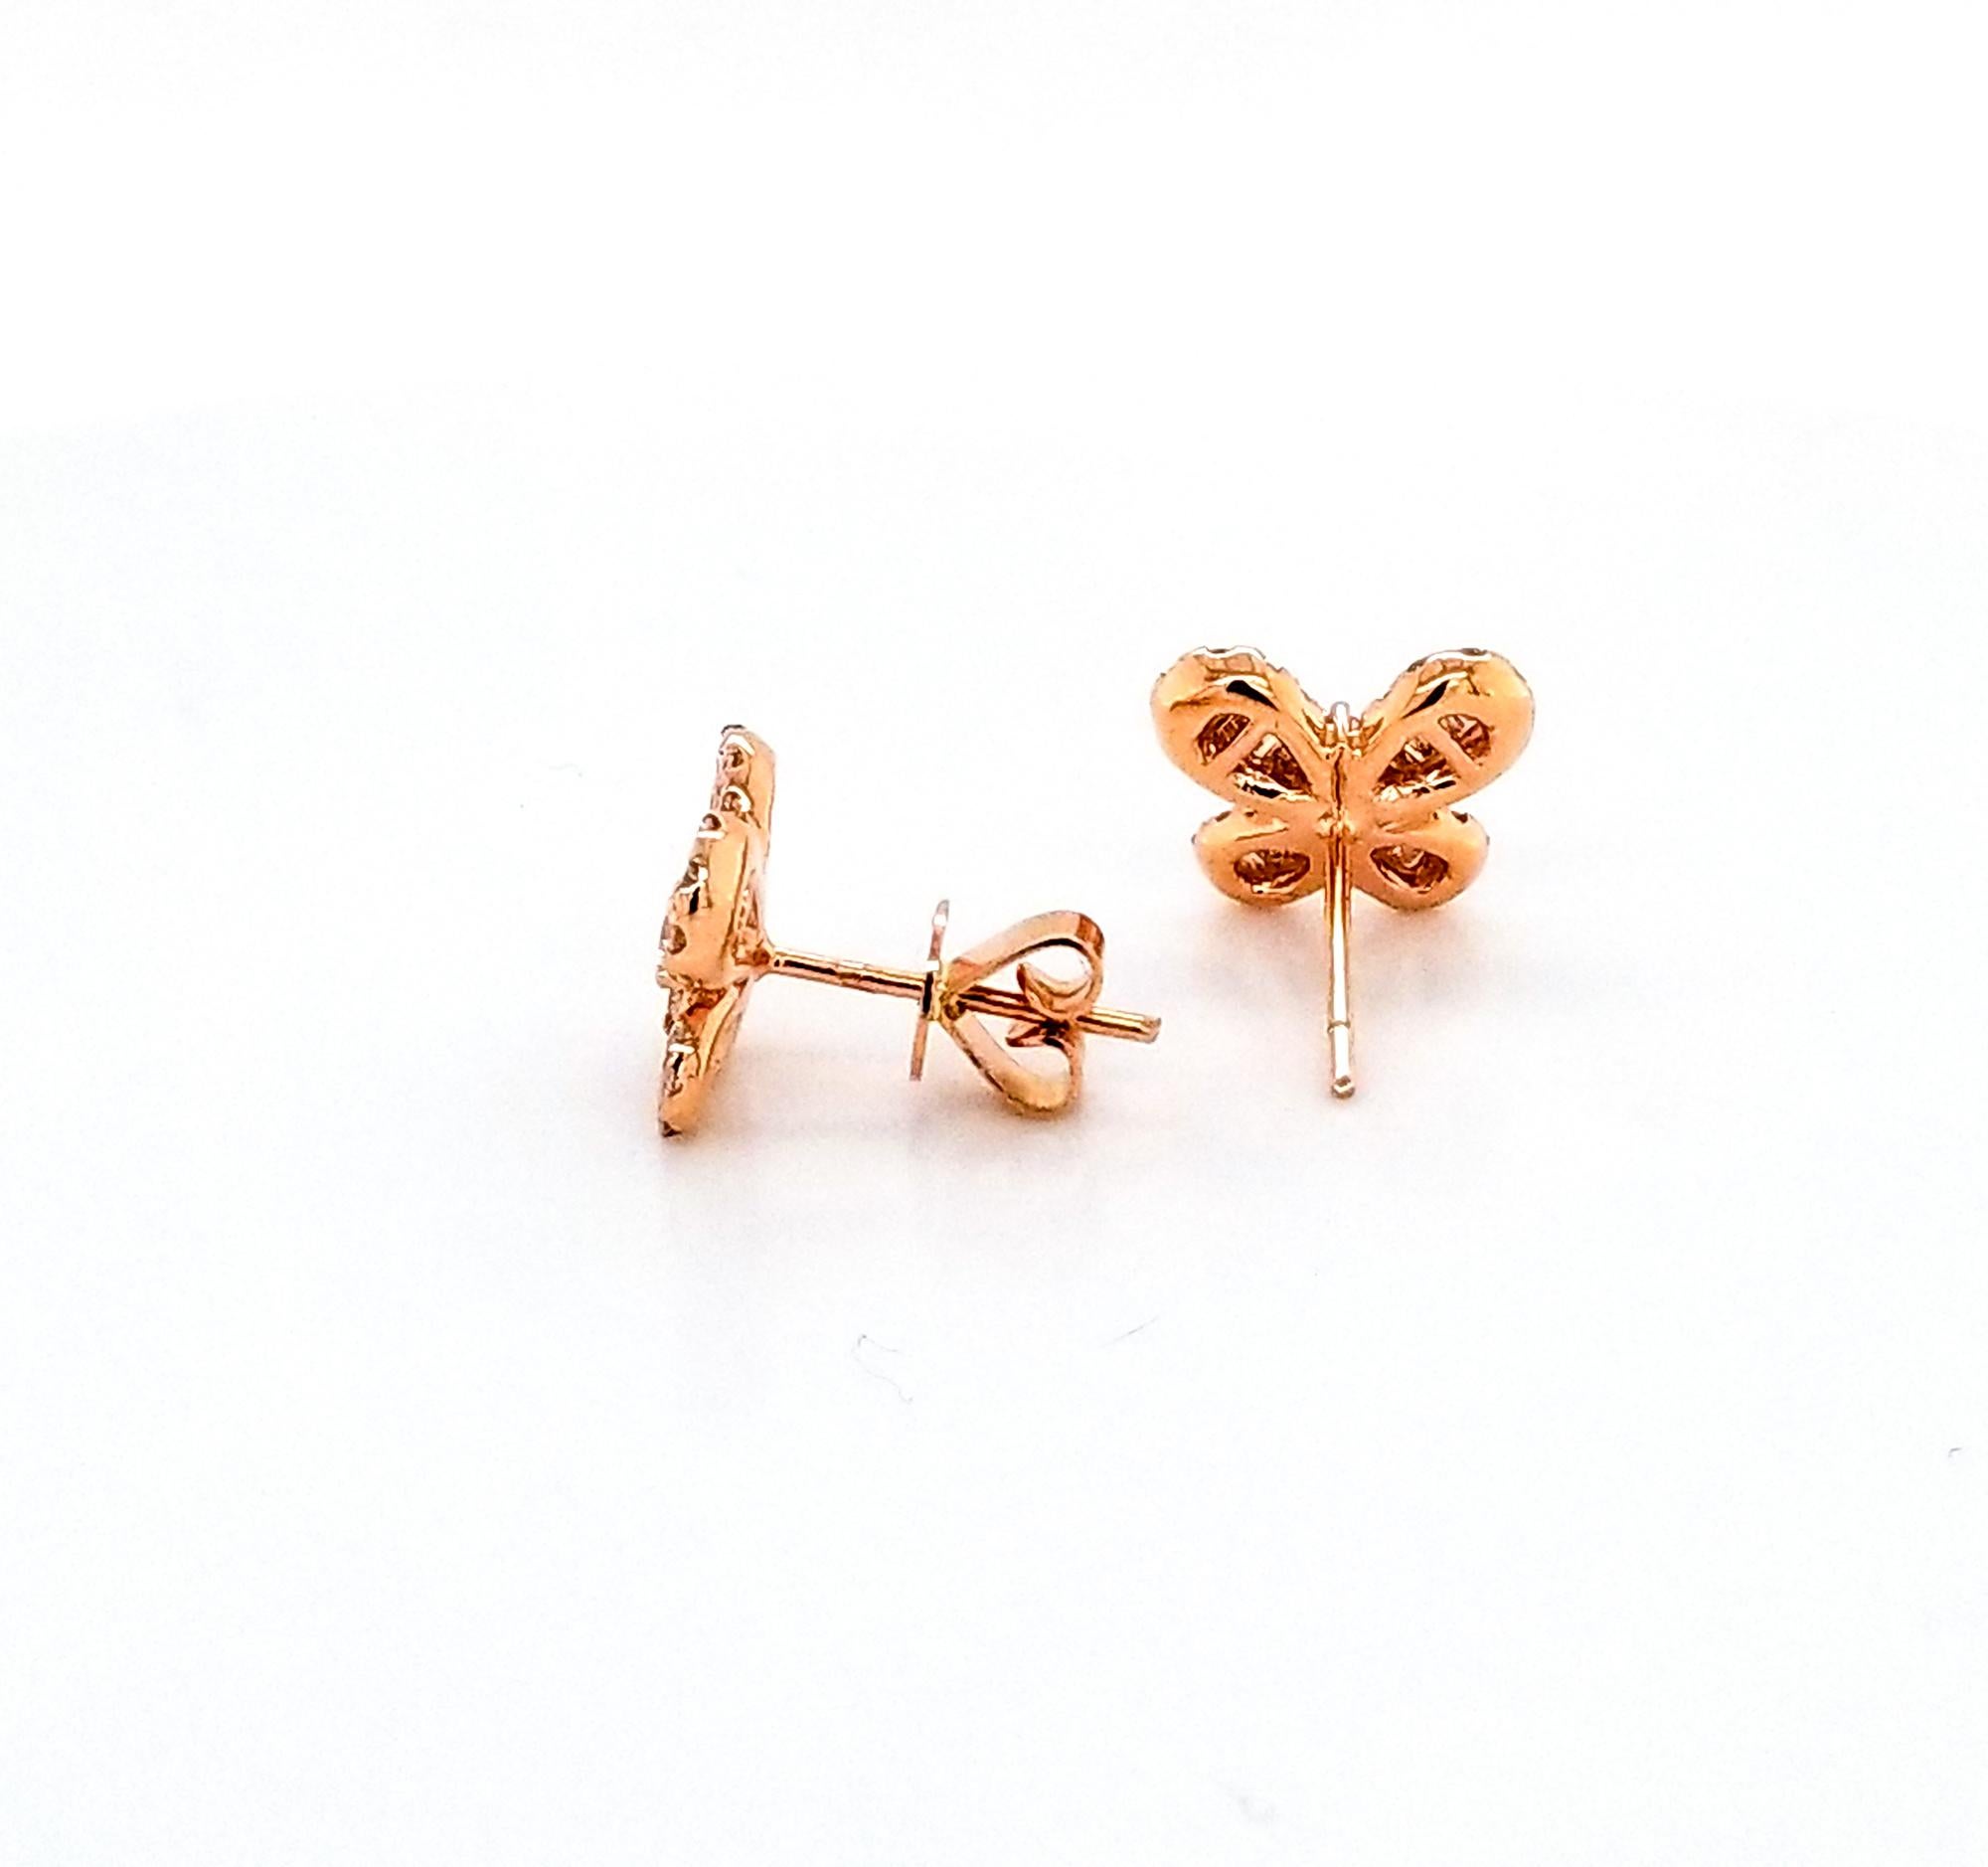 Charming stud earrings designed as butterflies, embellished with the invisibly-set diamonds and made in 14k rose gold.
24 baguette diamonds weighing 0.17 carats.
78 round diamonds weighing 0.57 carats.
Total weight of the diamonds is 0.74